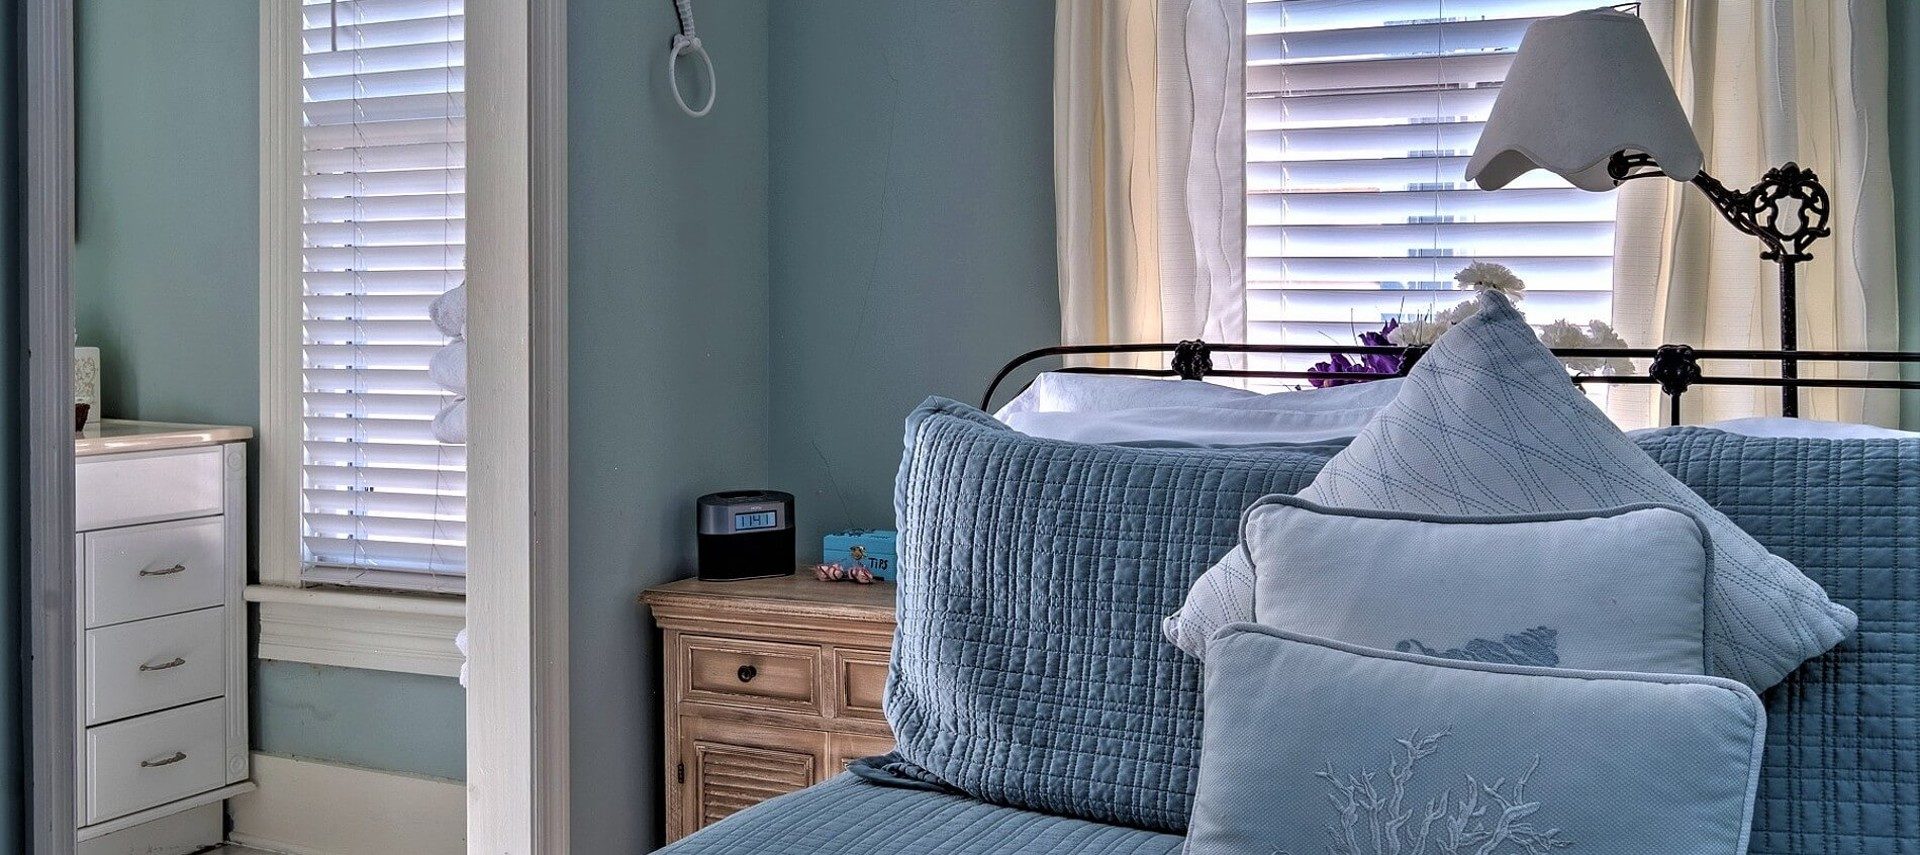 Small guestroom showing wrought iron headboard on bed with blue quilt, window, and doorway into bathroom